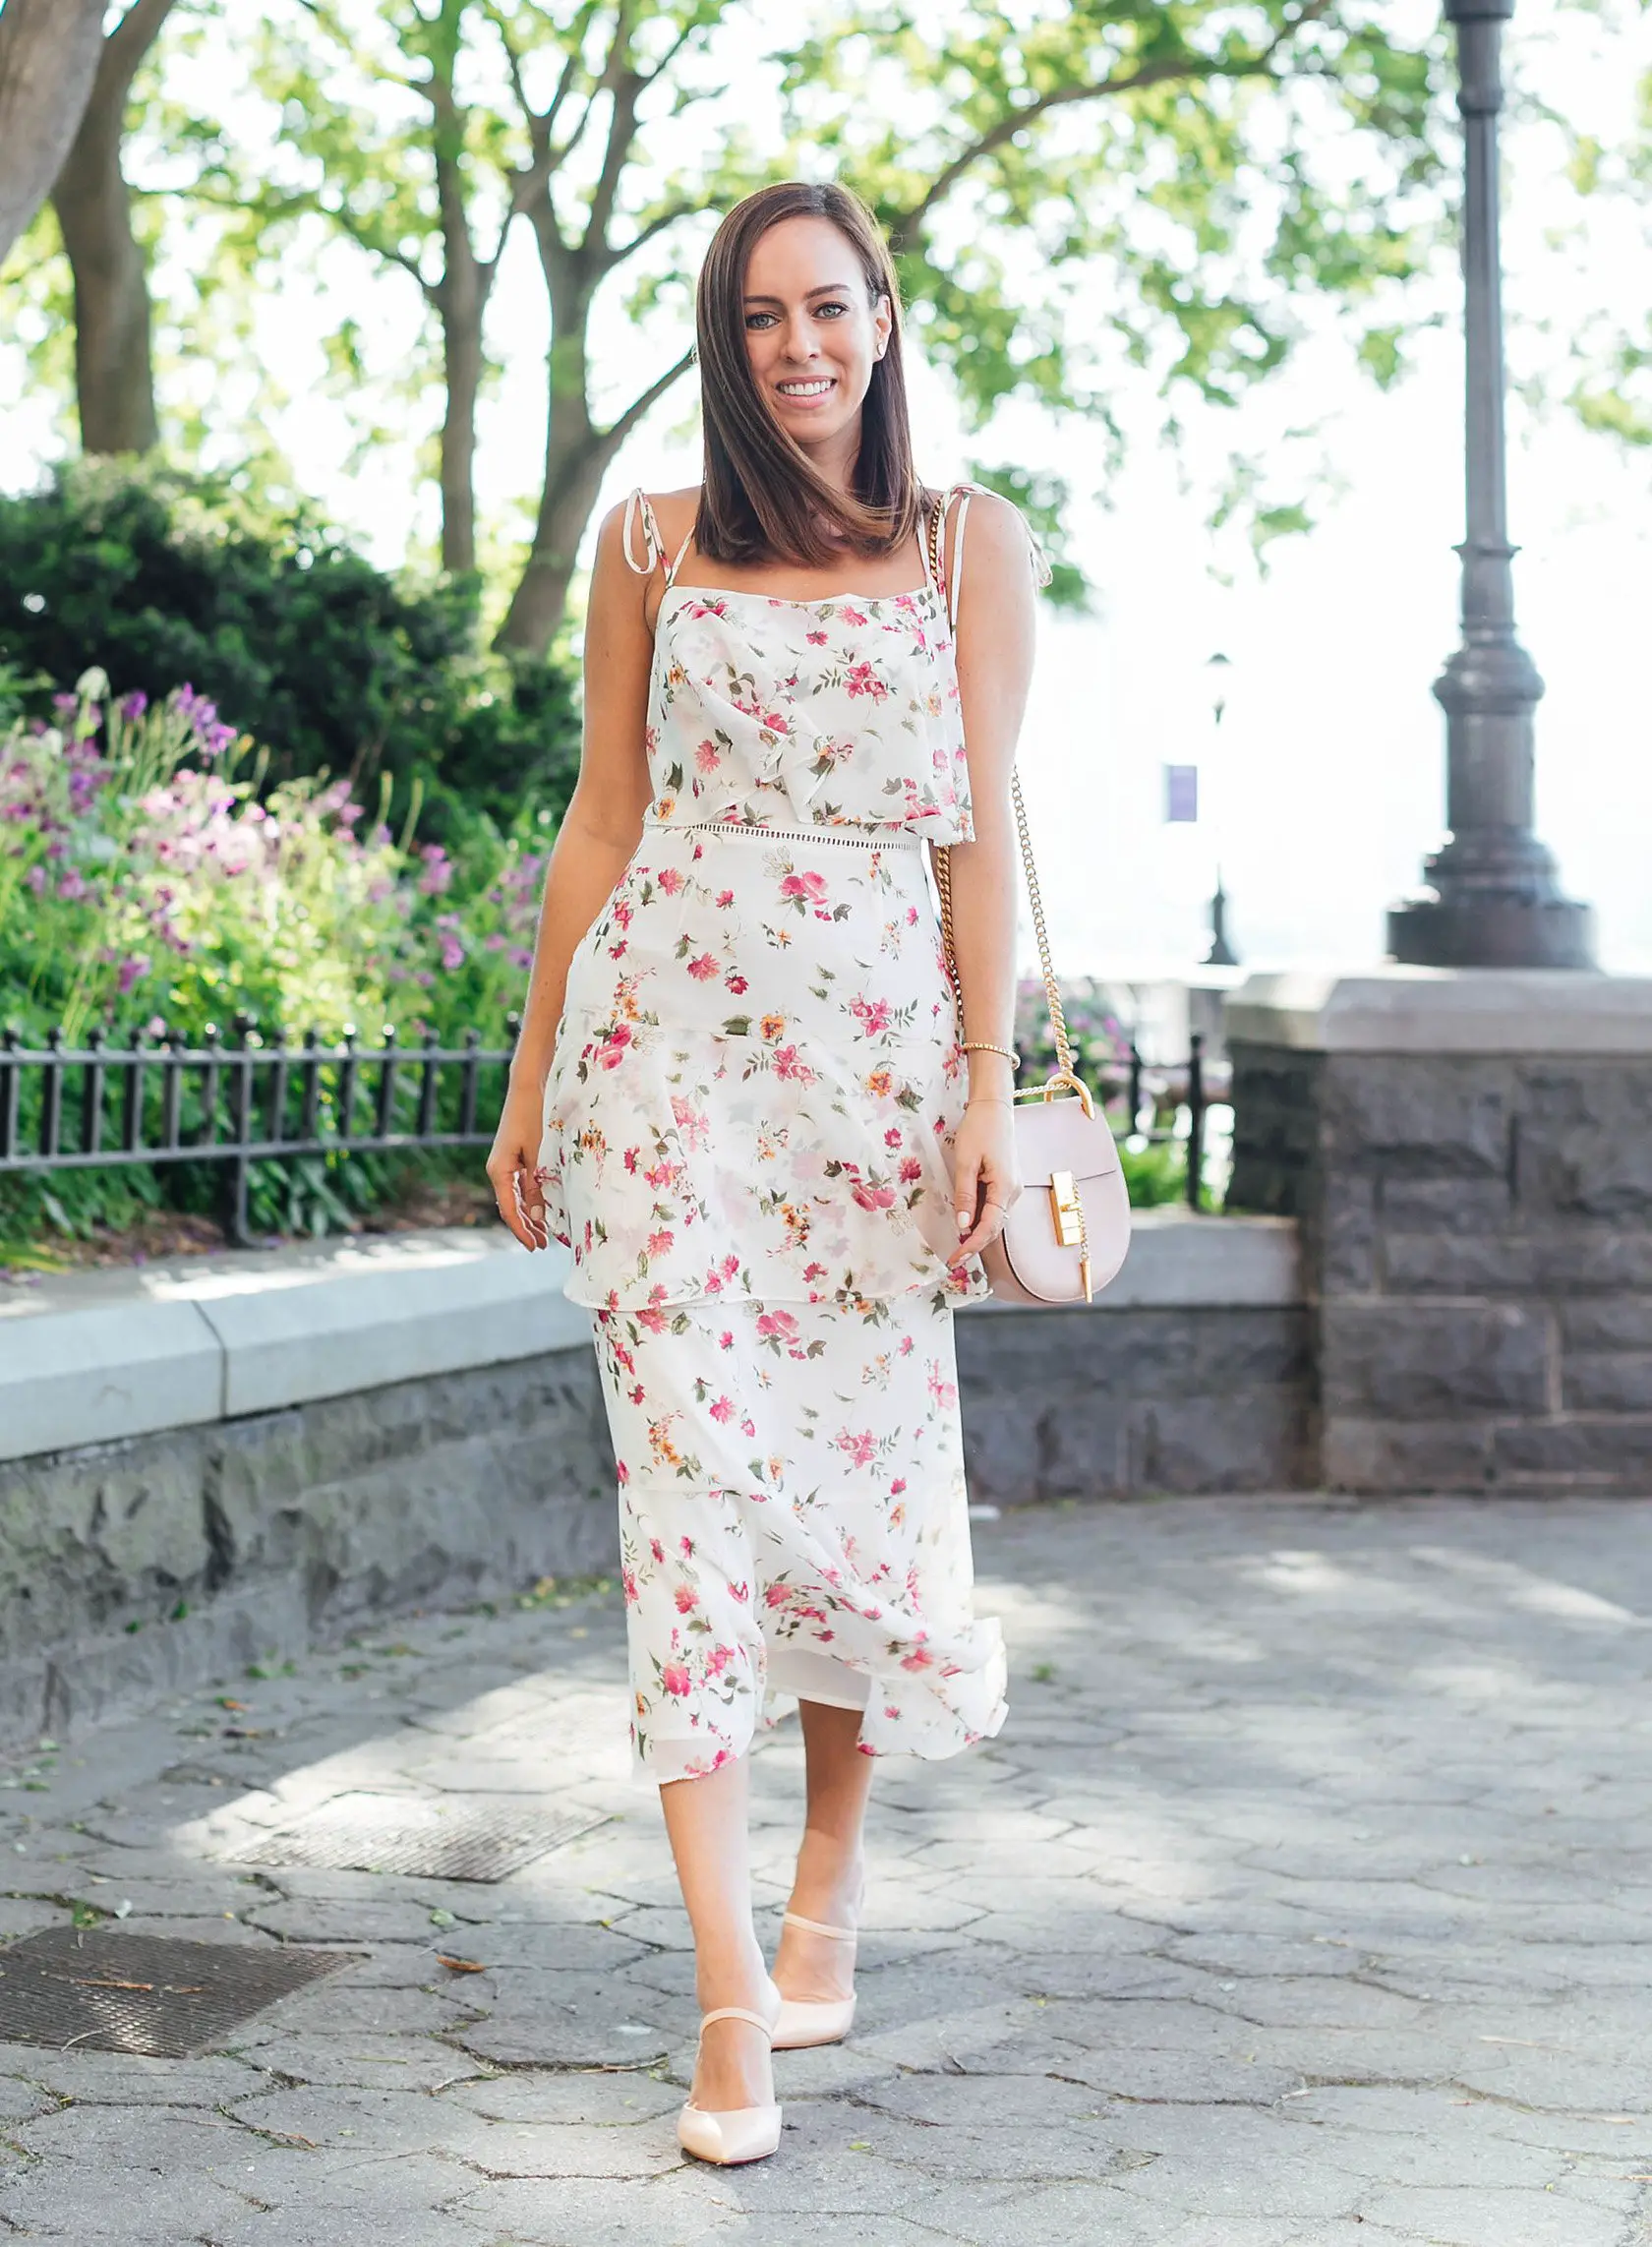 What to Wear to a Summer Bridal Shower